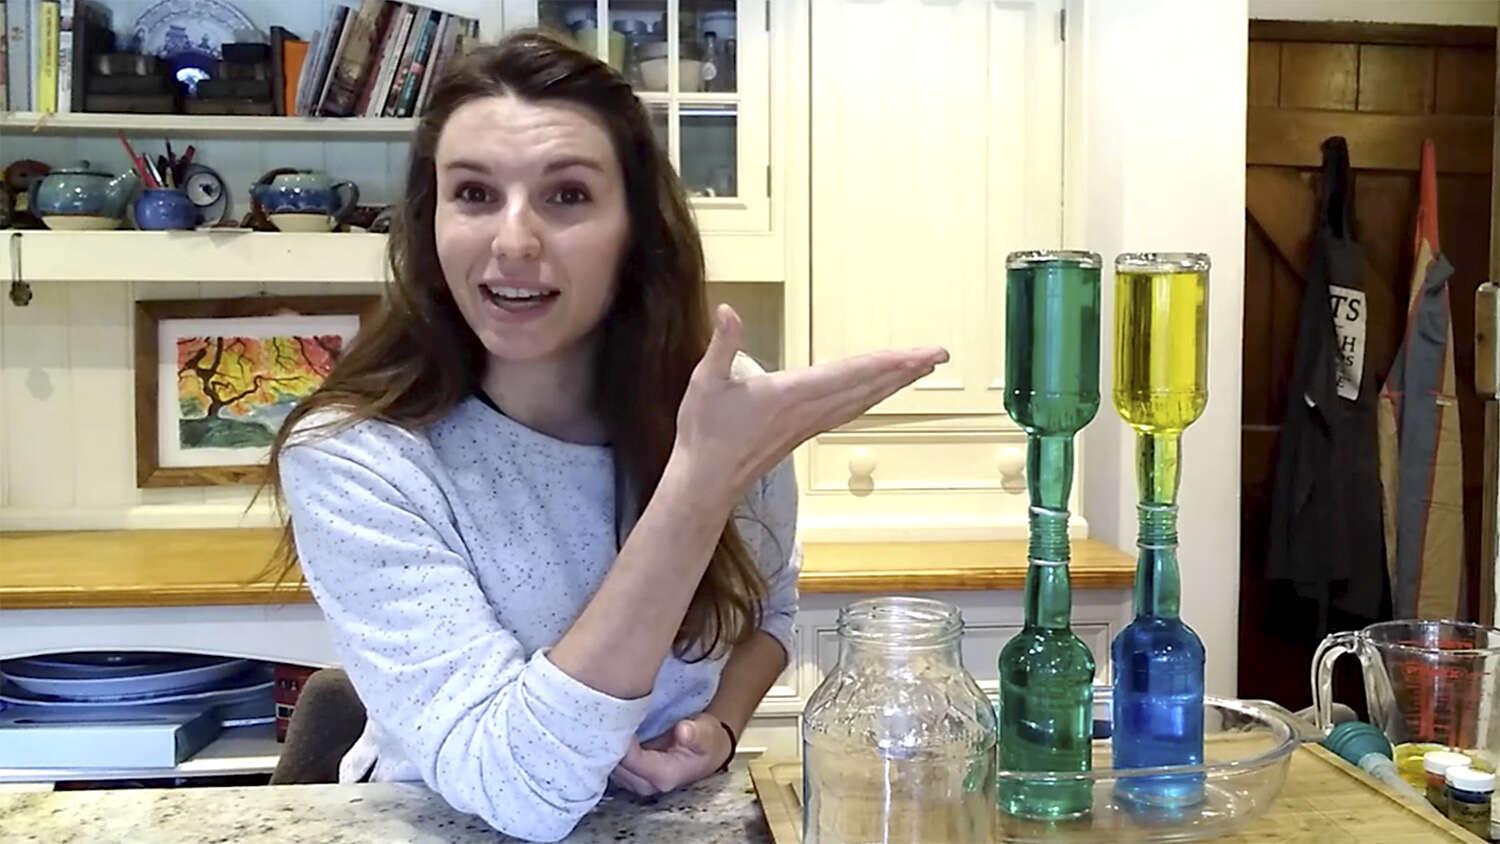  Watch hot water rise above cold using clear bottles and food colouring in this fun physics experiment.